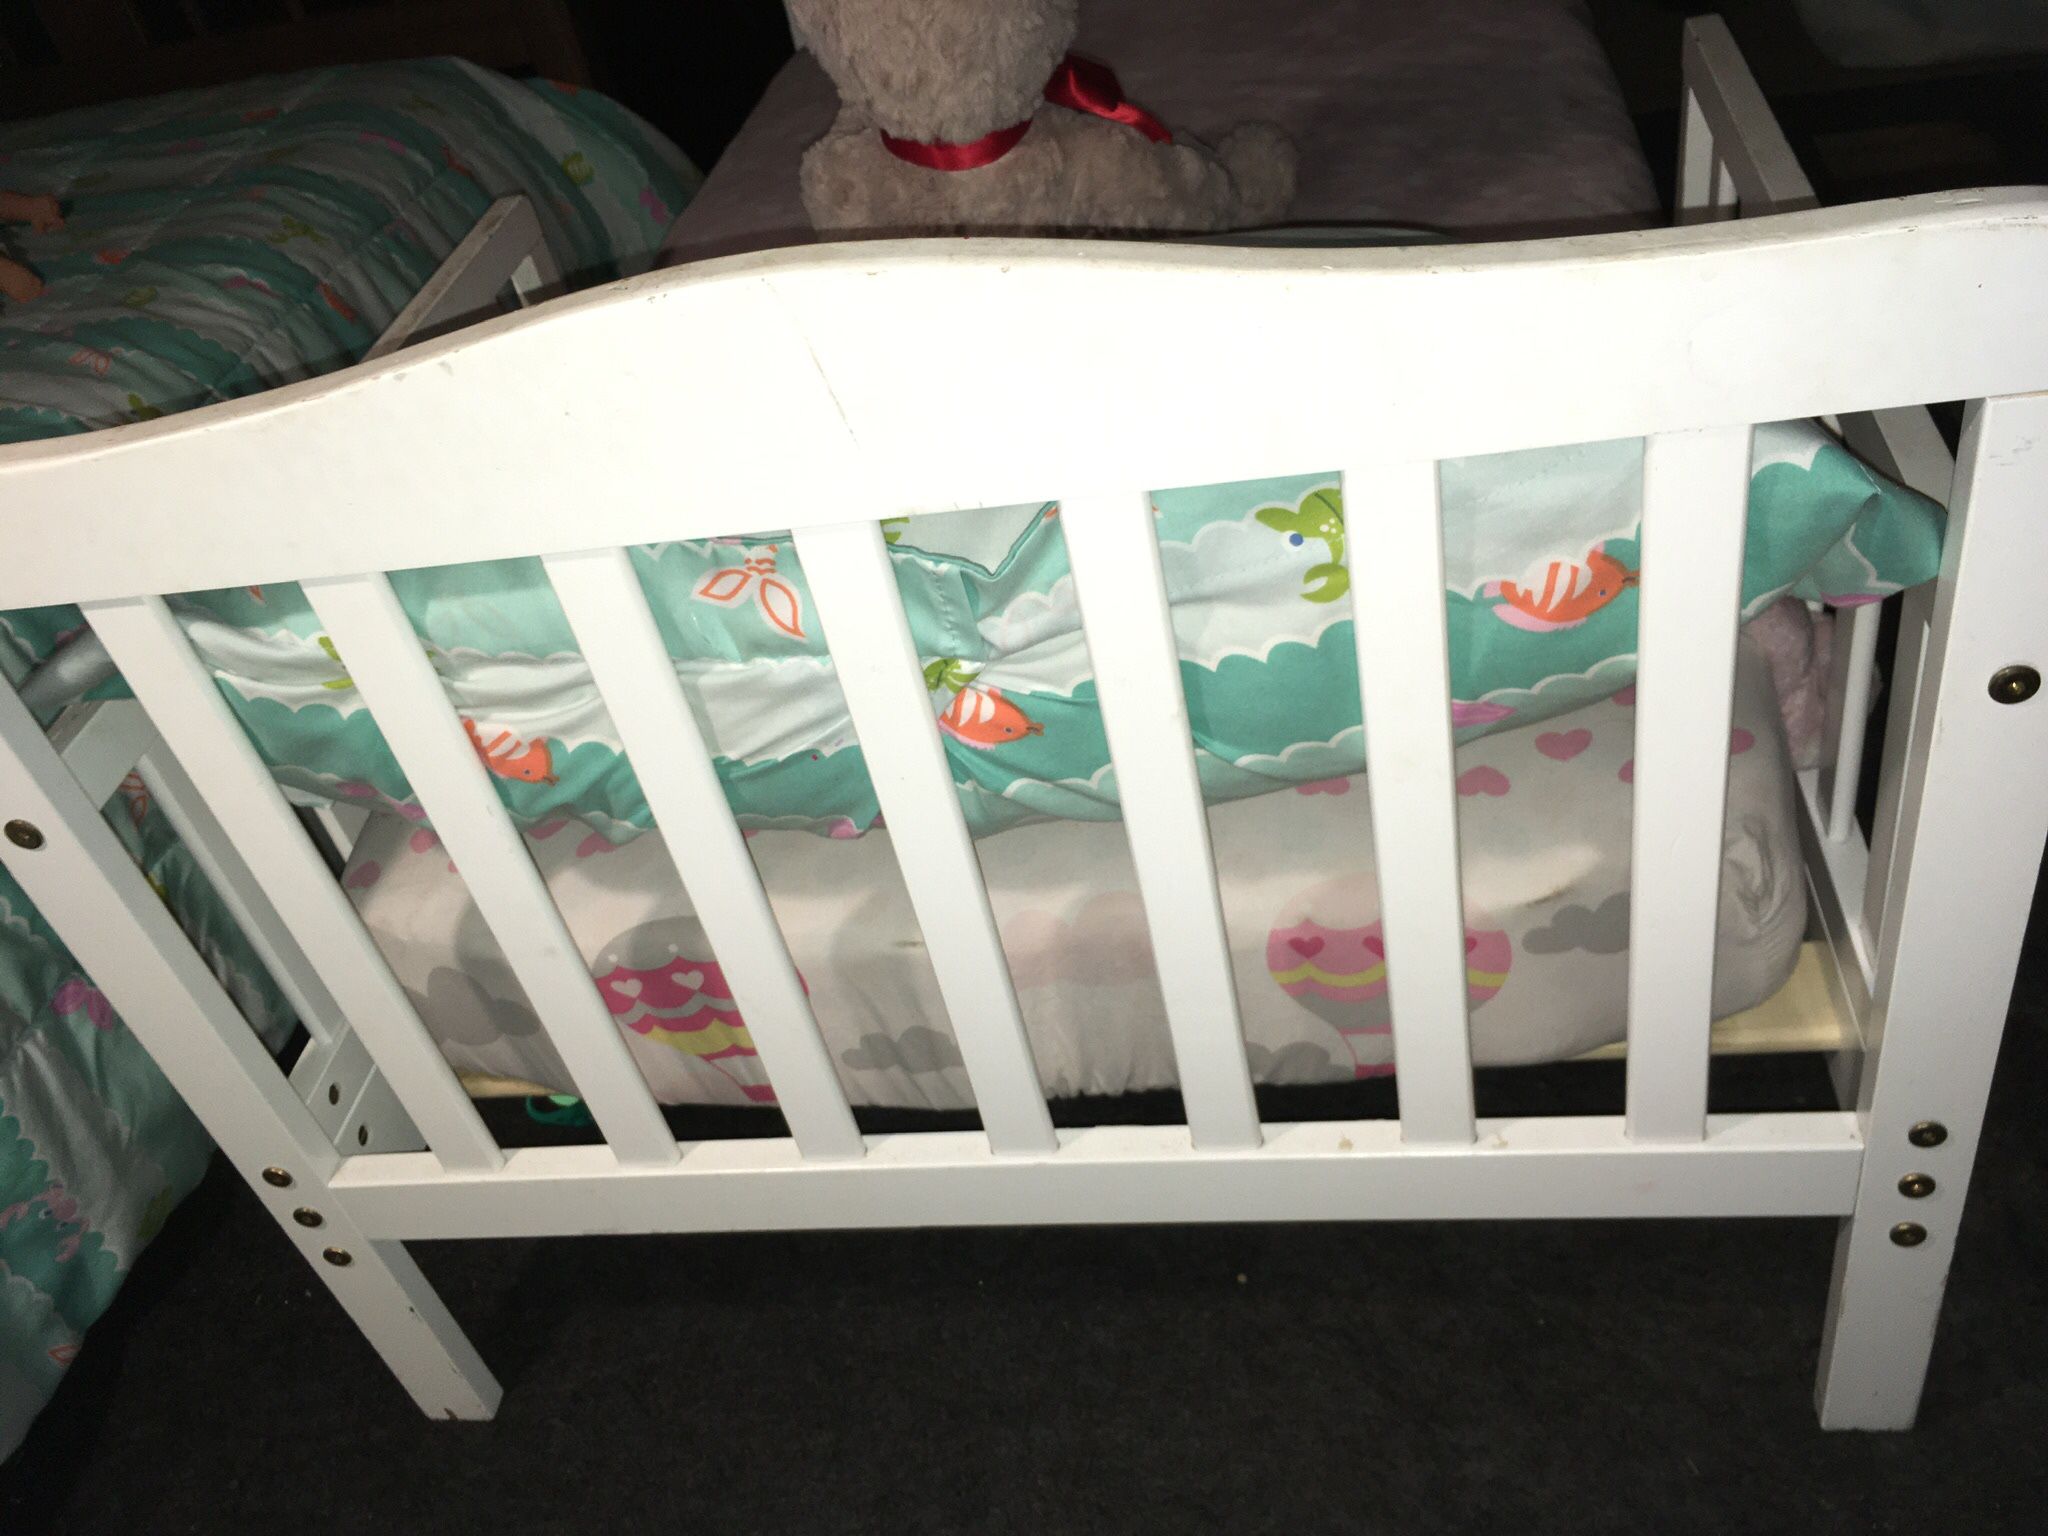 Toddler Crib Never Used Comes With Matt And New Fitted Sheets 